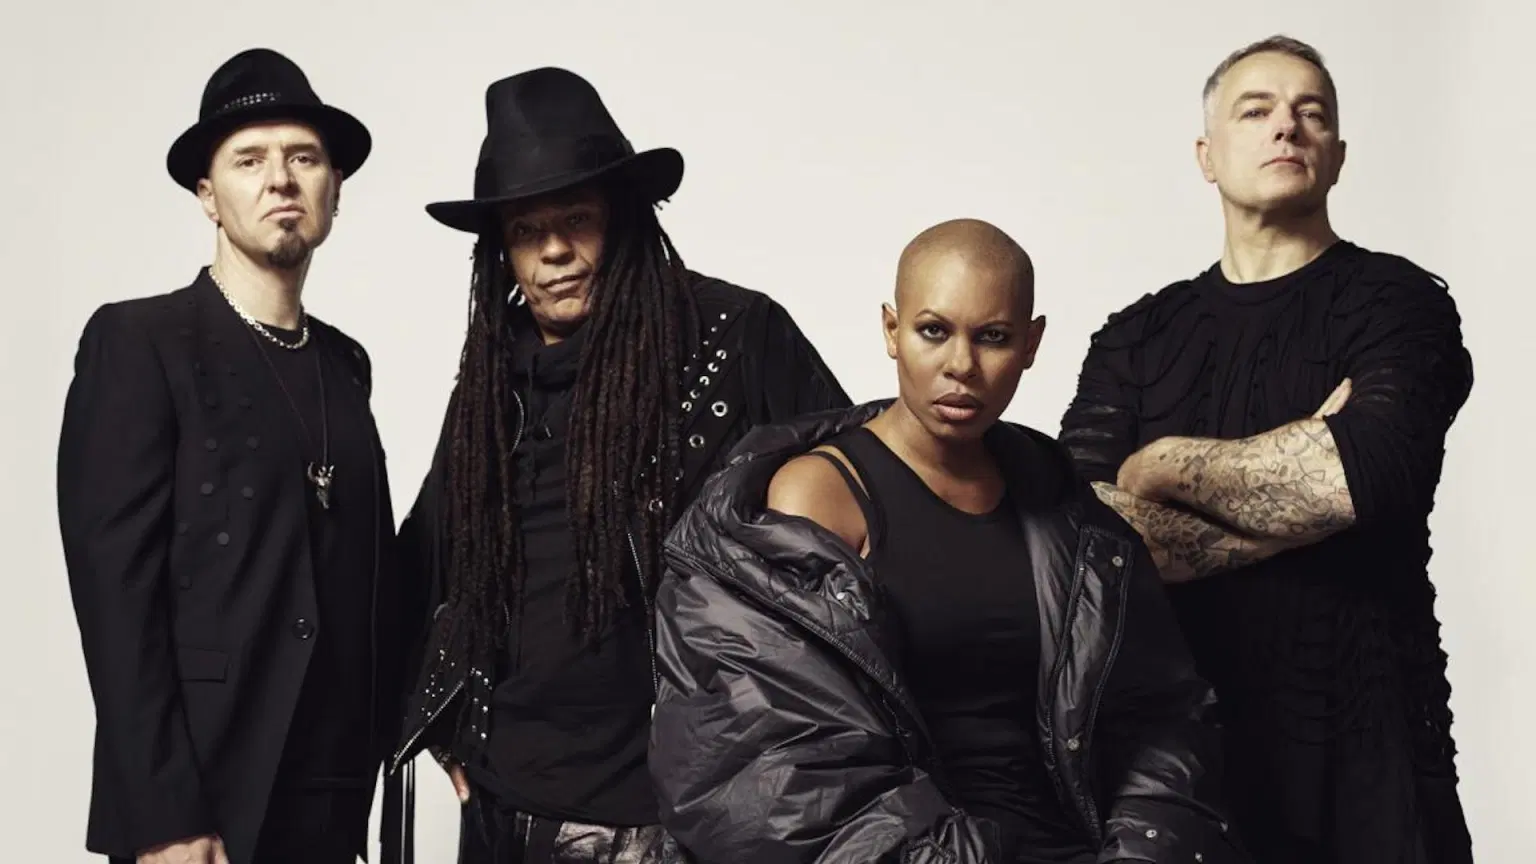 The band Skunk Anansie